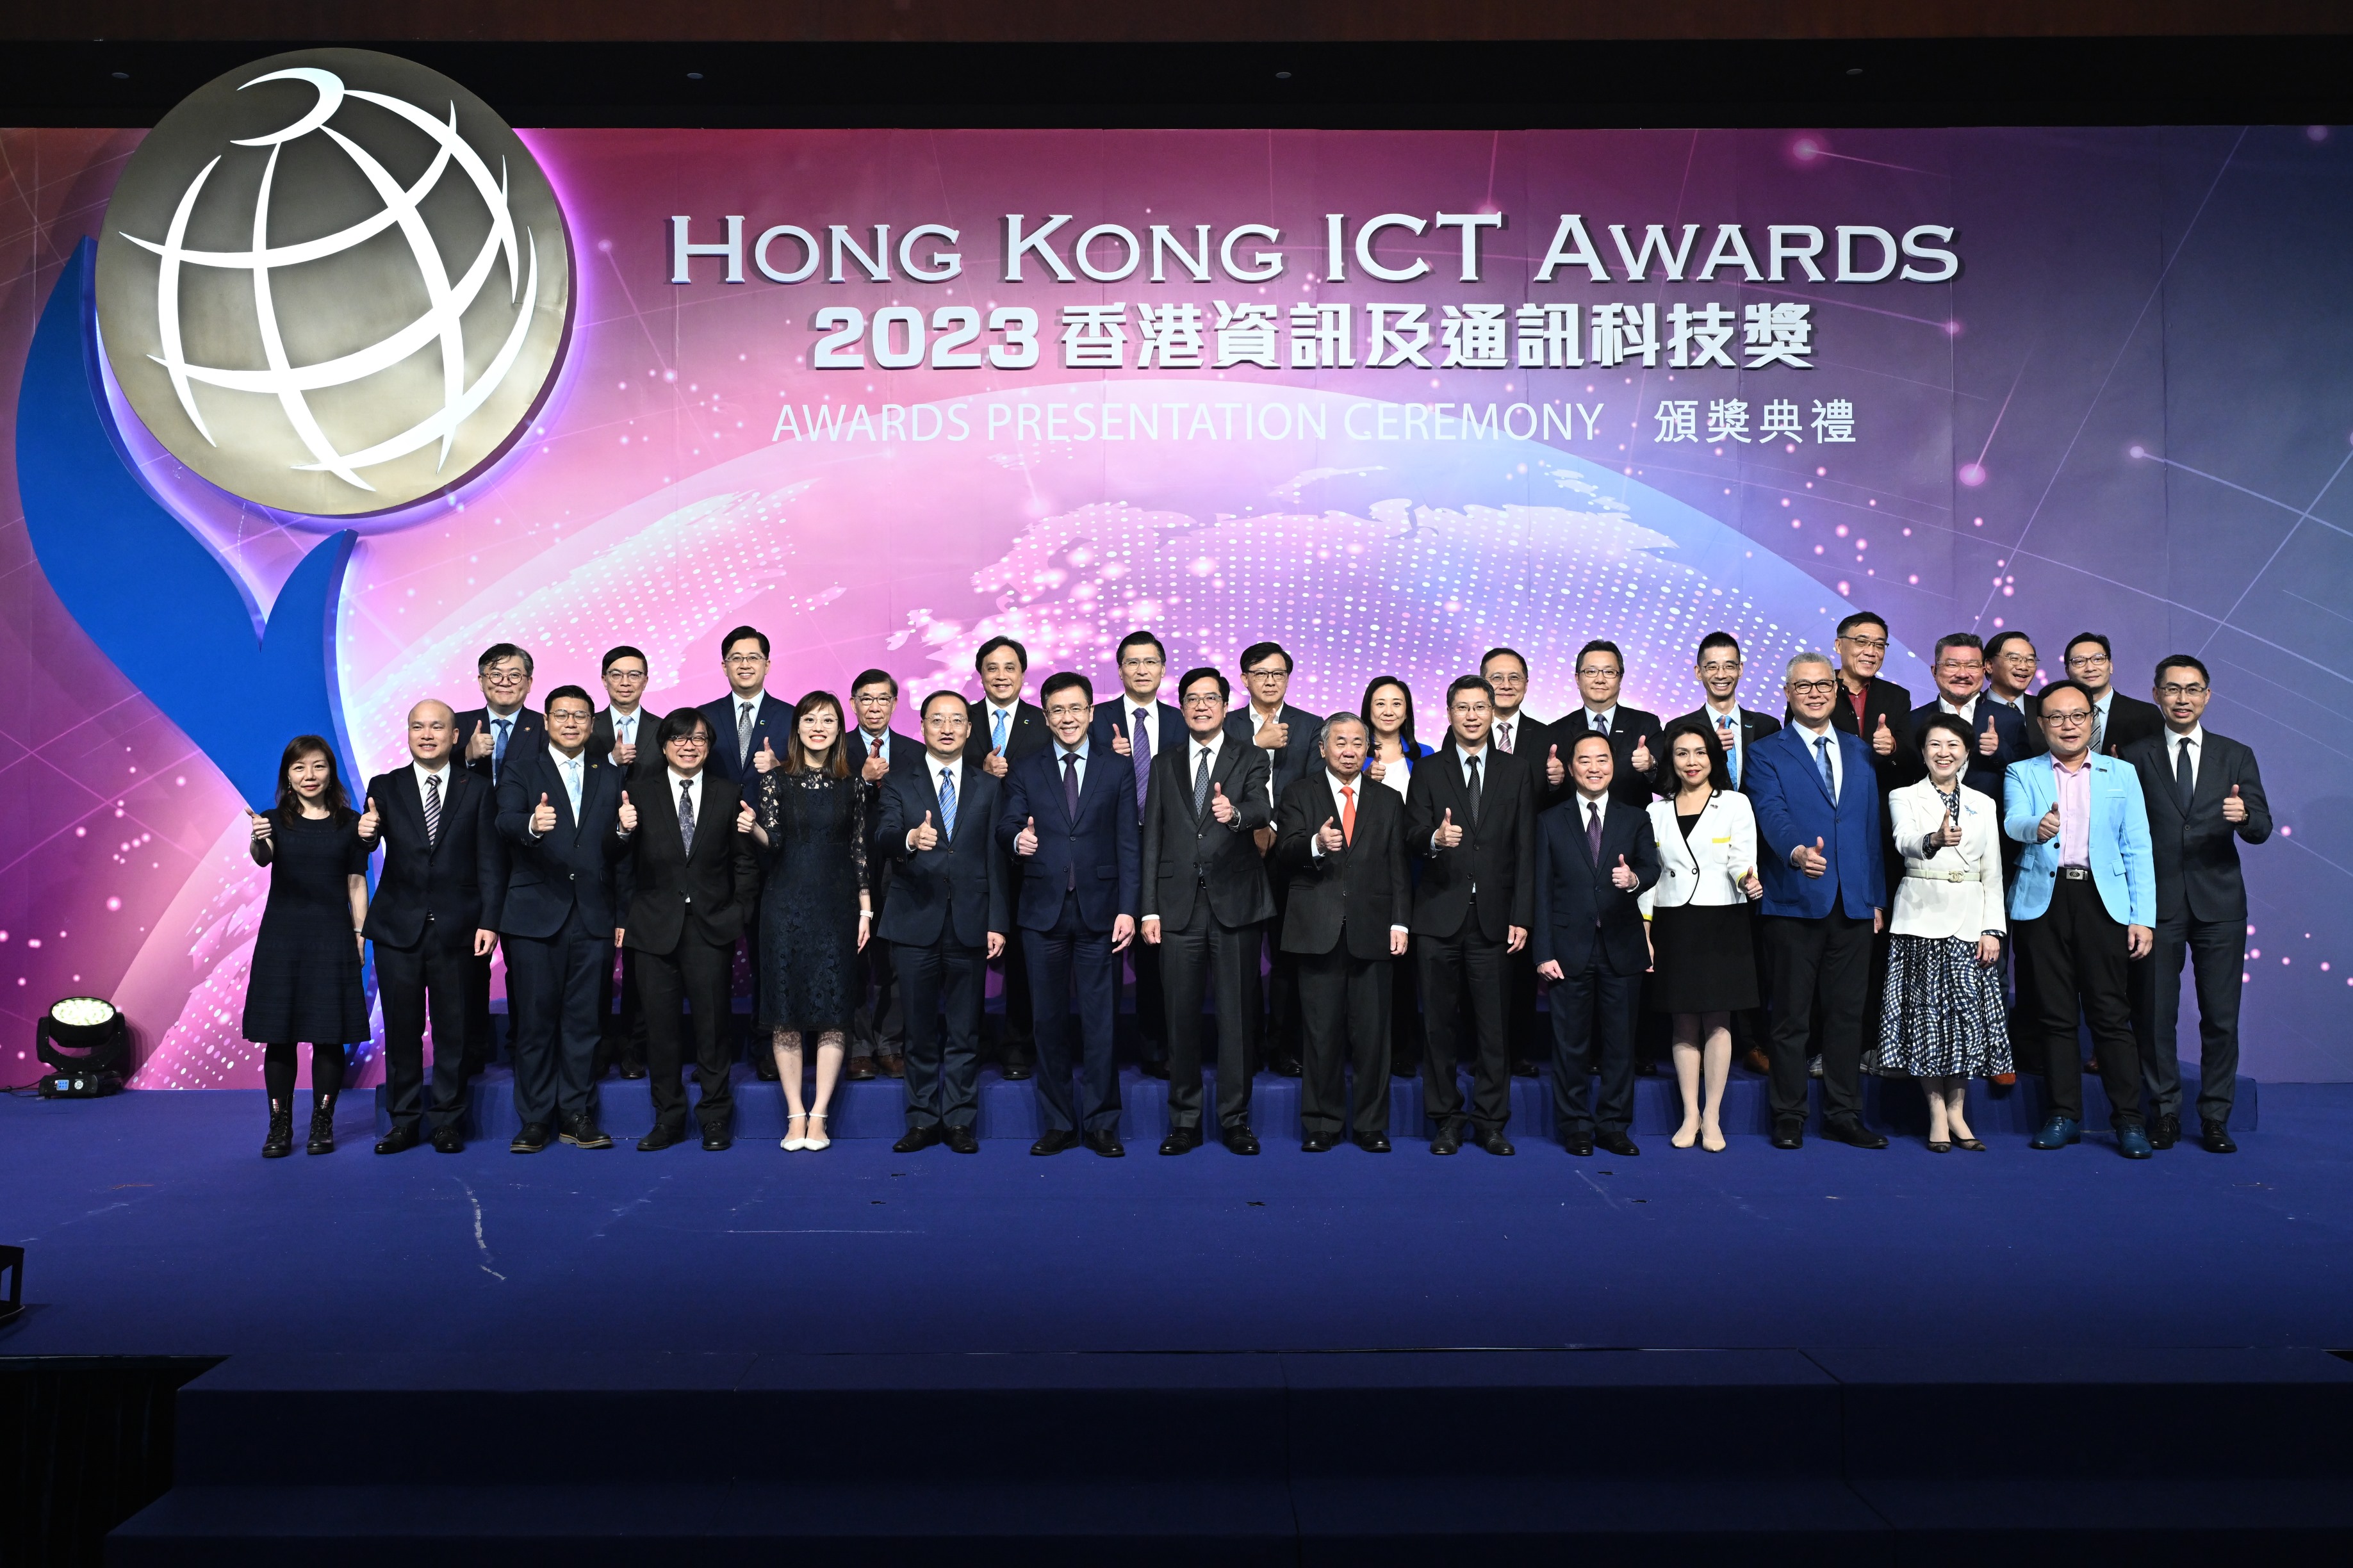 Hong Kong ICT Awards 2023 Awards Presentation Ceremony VIPs, Leading Organisers, Steering Committee and Standards Assurance Sub-committee Group Photo